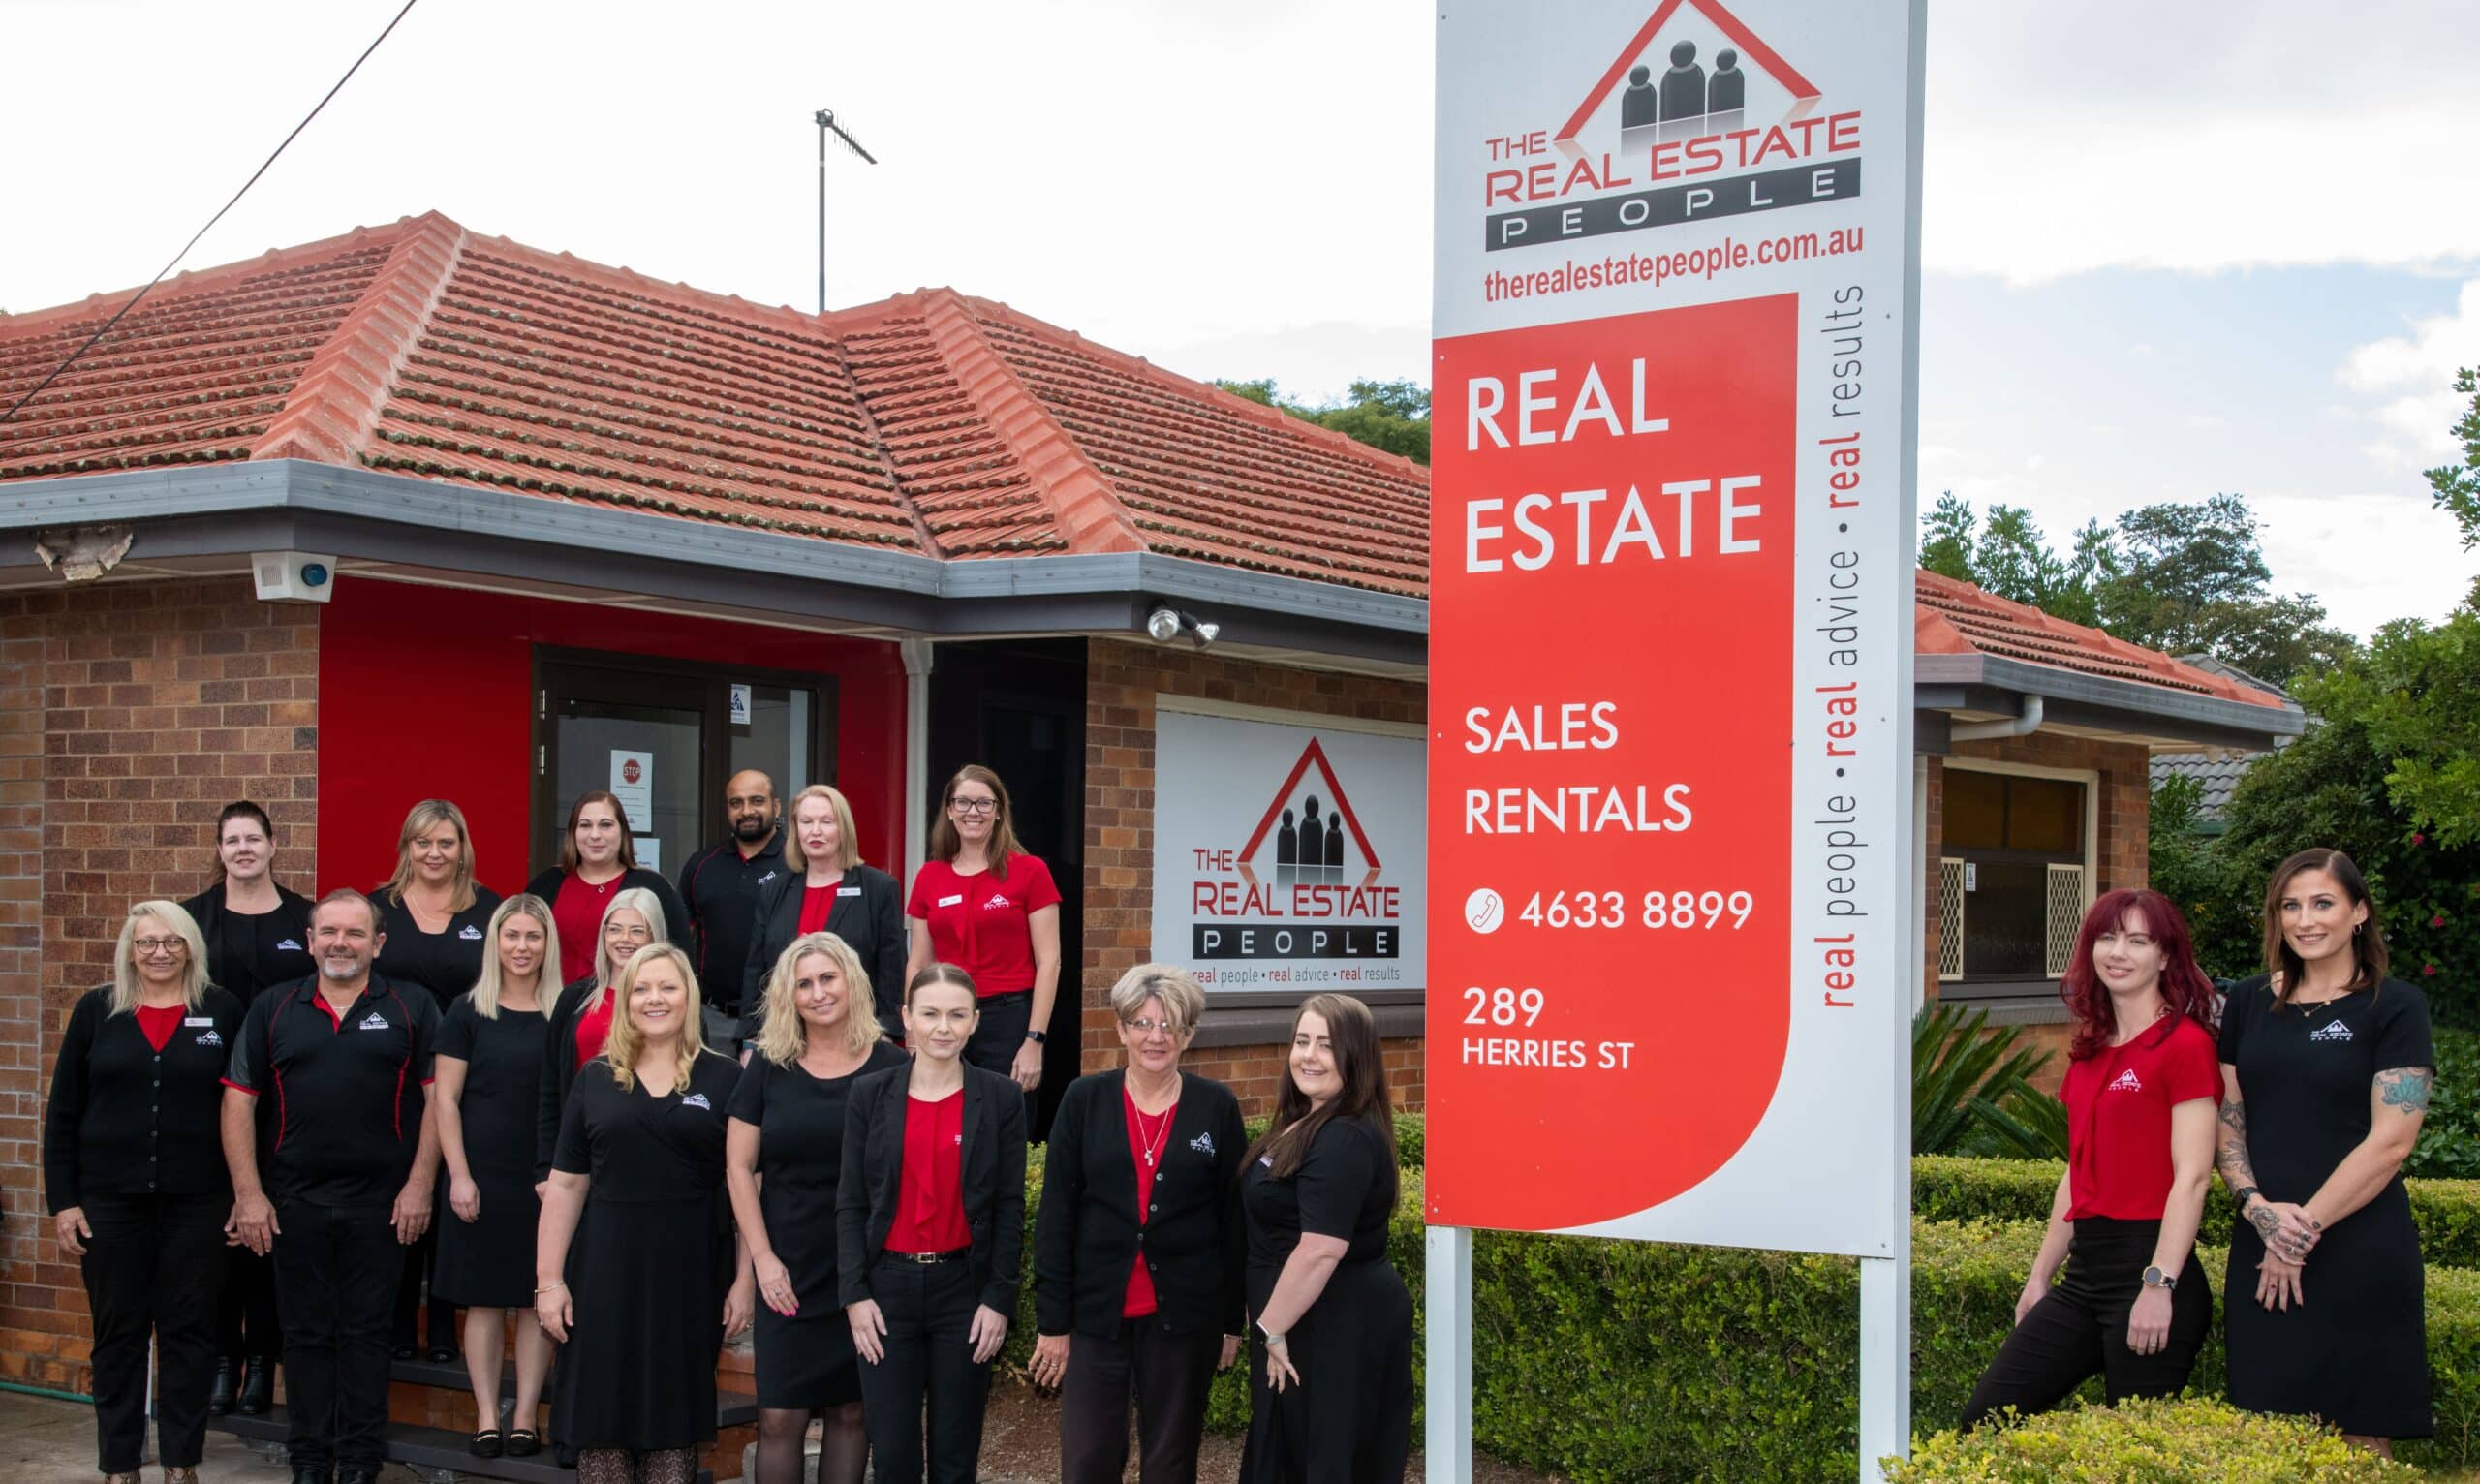 The Real Estate People team and staffs